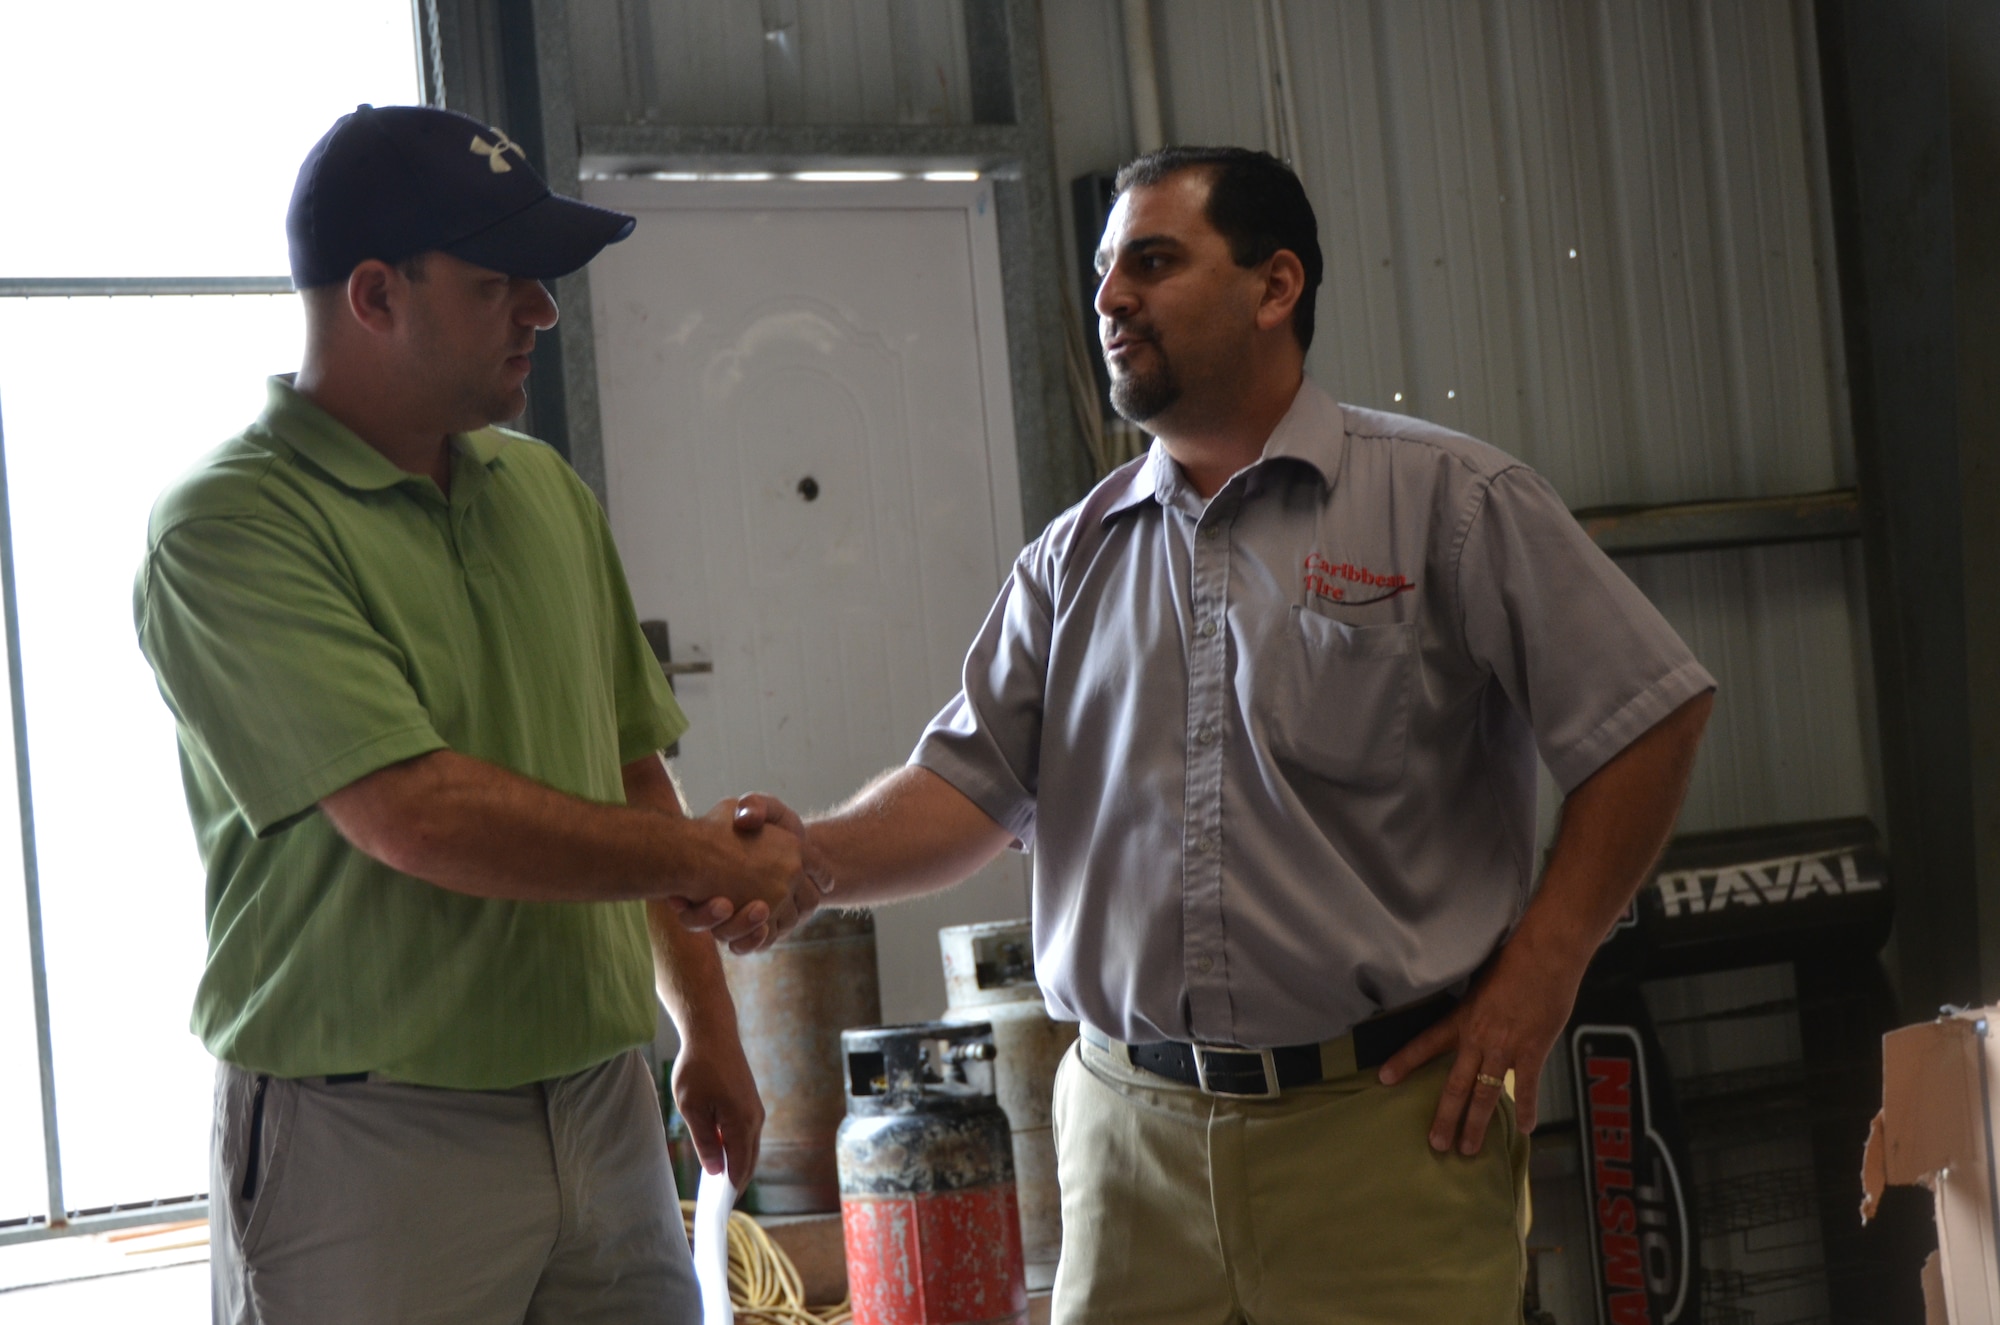 Tech. Sgt. Ryan Schnepf, New Horizons contracting officer, shakes hands with the manager of a local tire repair shop after coming to a purchase account agreement March 13. Contracting officials will be working with several local businesses throughout the exercise. (U.S. Air Force photo by Master Sgt. Kelly Ogden/Released)